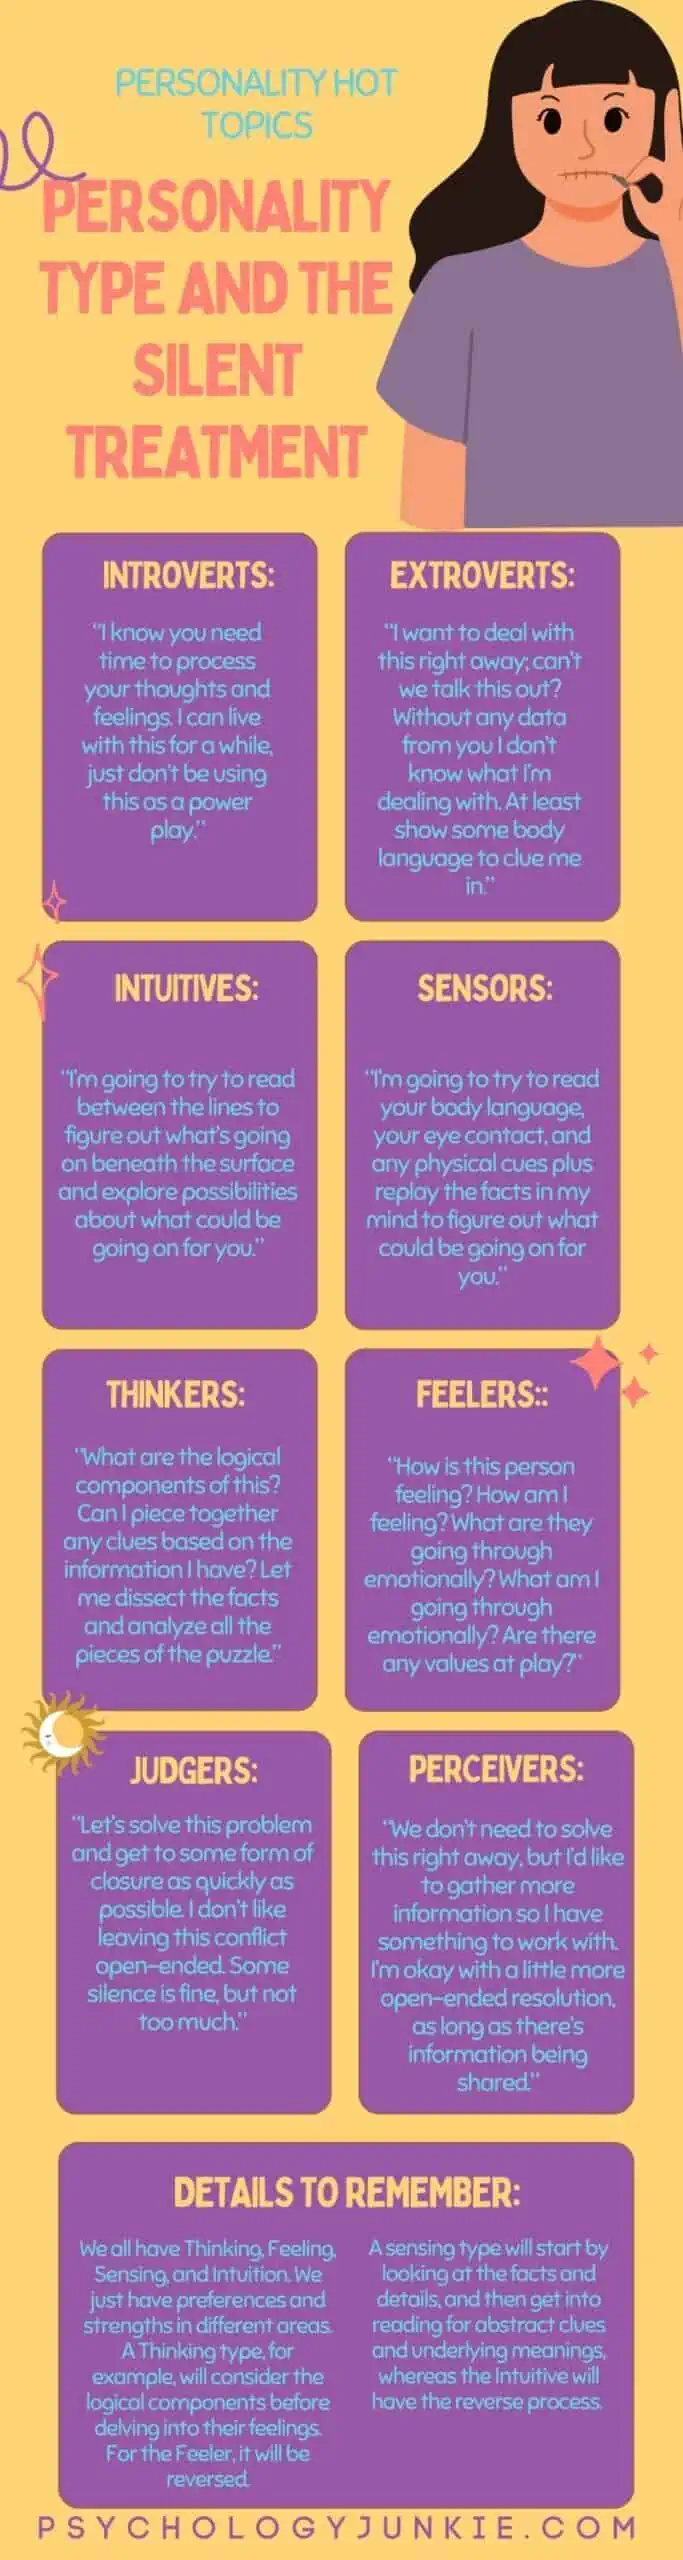 An infographic describing how the Myers-Briggs personality types react to the silent treatment. #MBTI #Personality